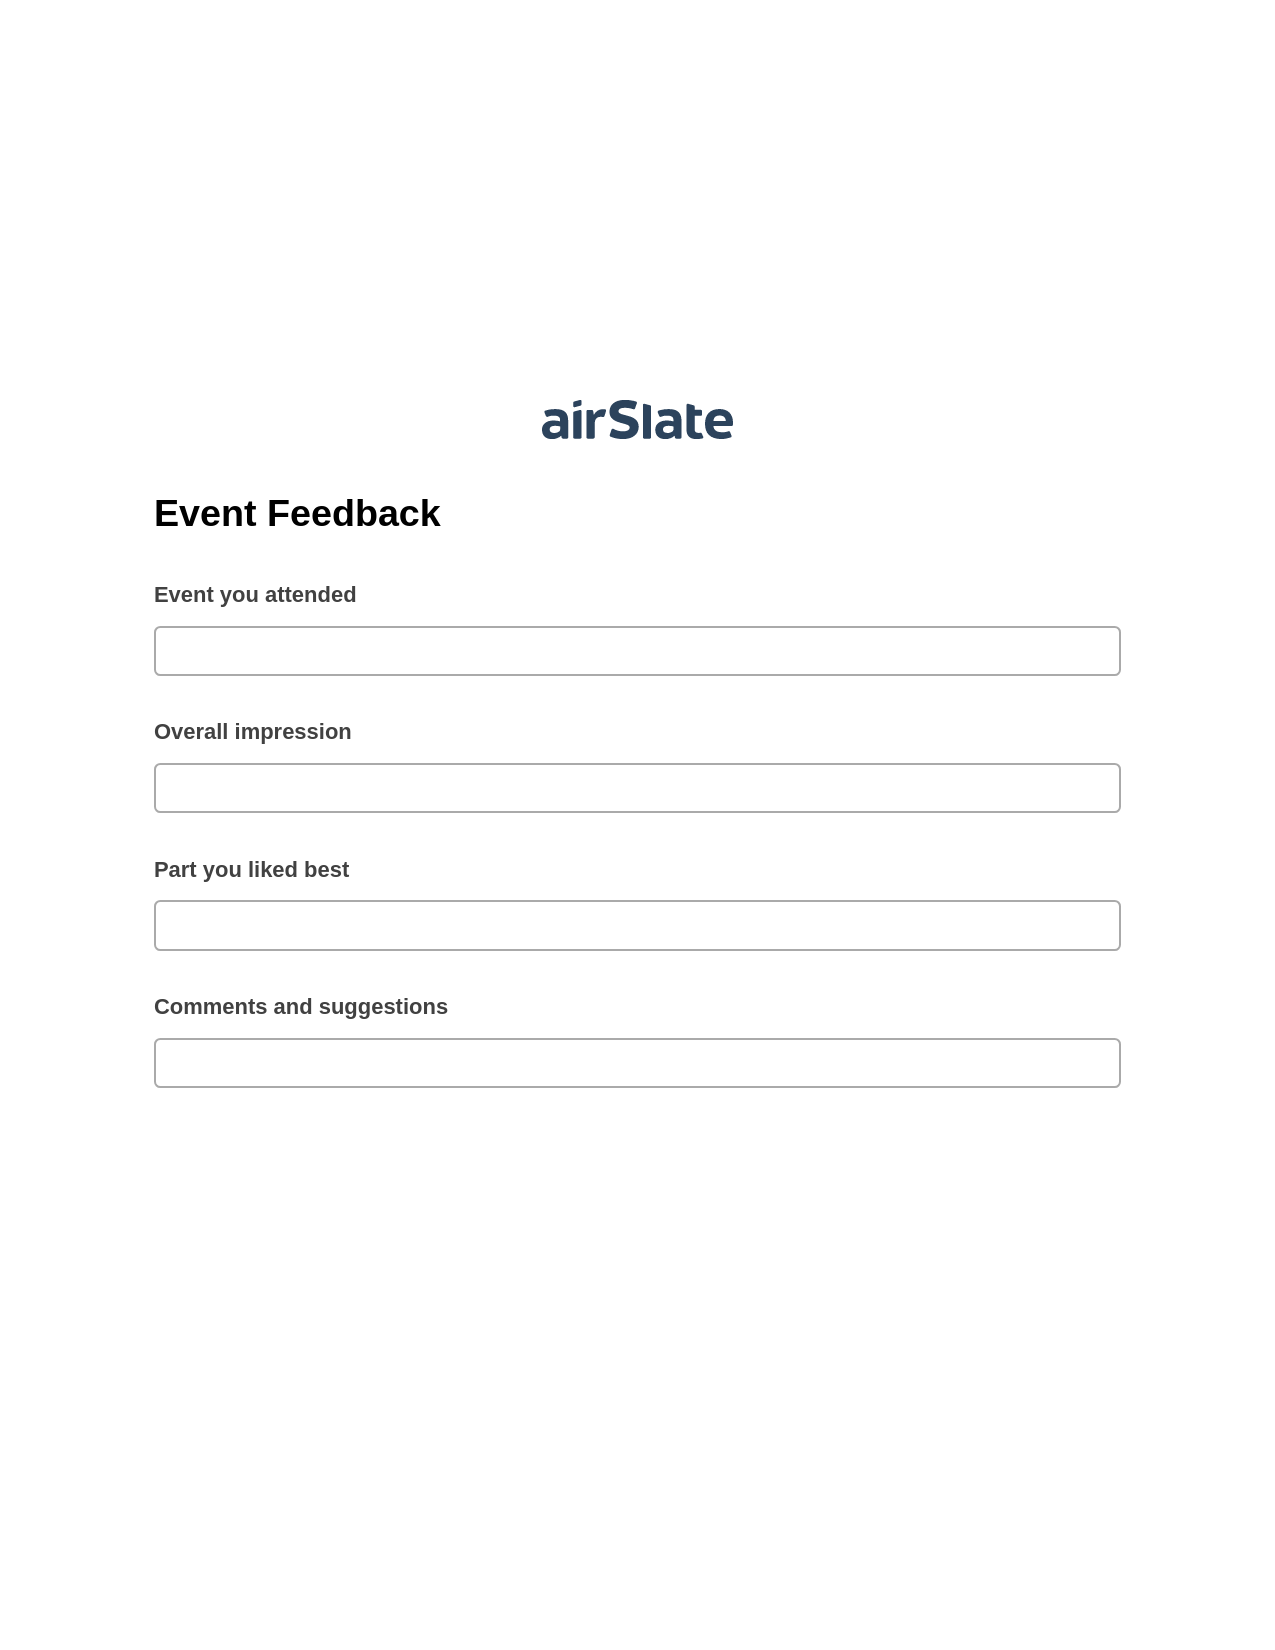 Event Feedback Pre-fill from MySQL Bot, Assign Slate Name Bot, Export to Smartsheet